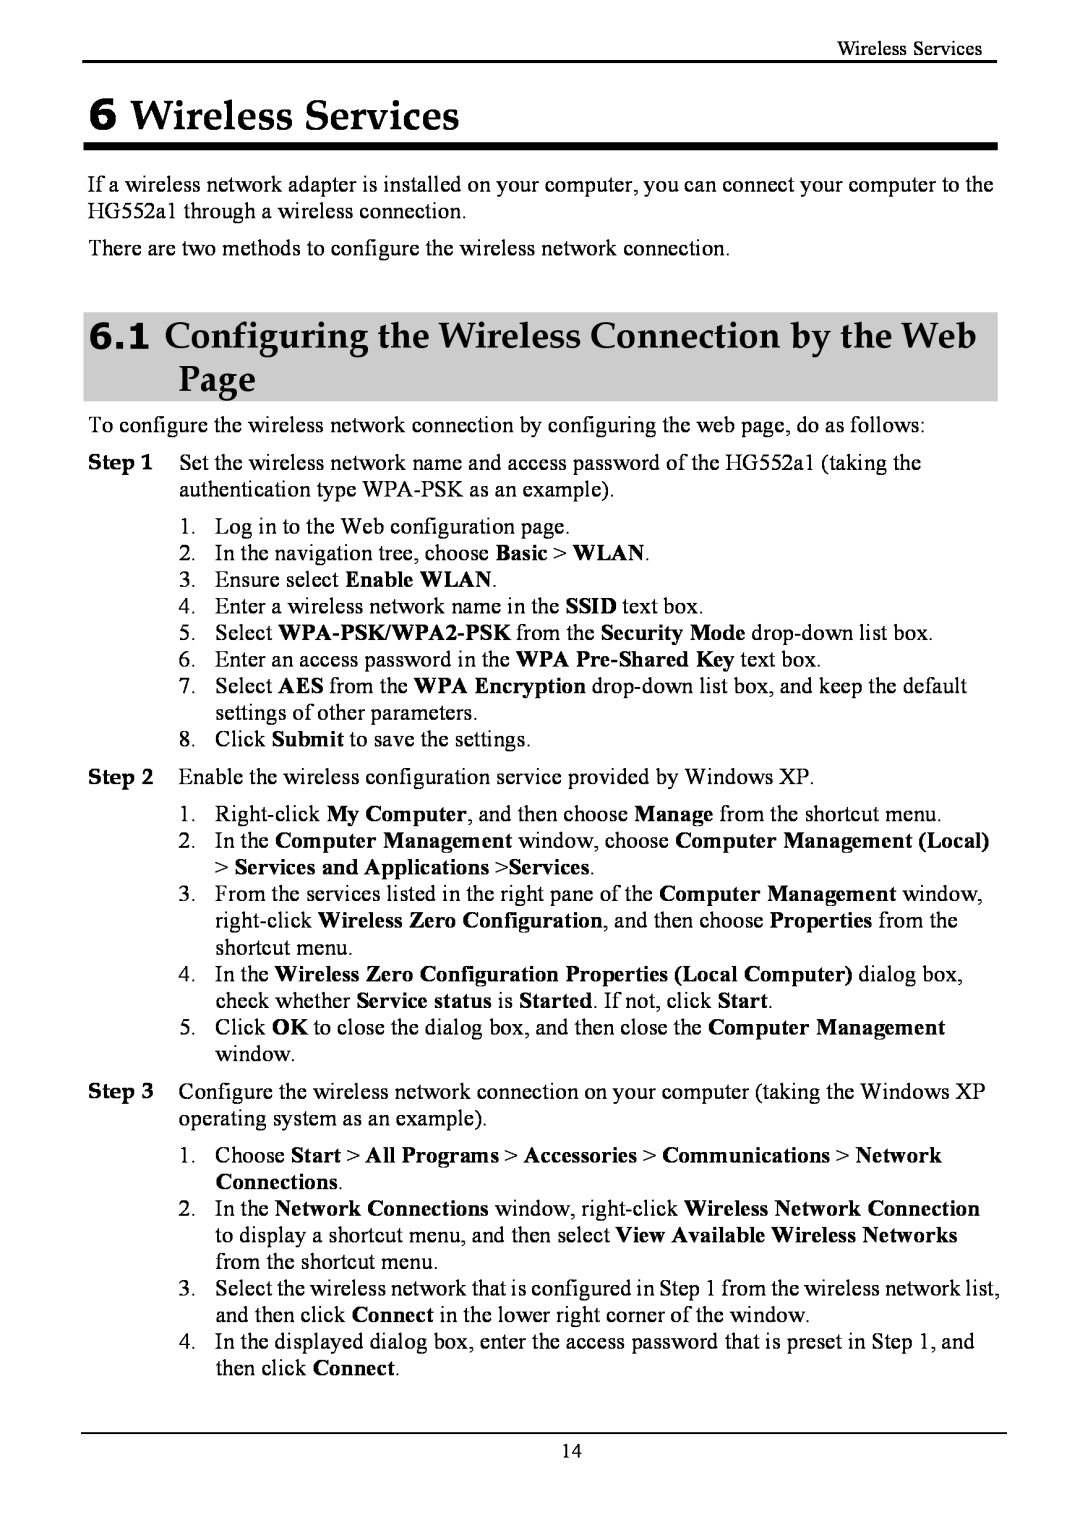 Huawei HG552a1 manual Wireless Services, Configuring the Wireless Connection by the Web Page 